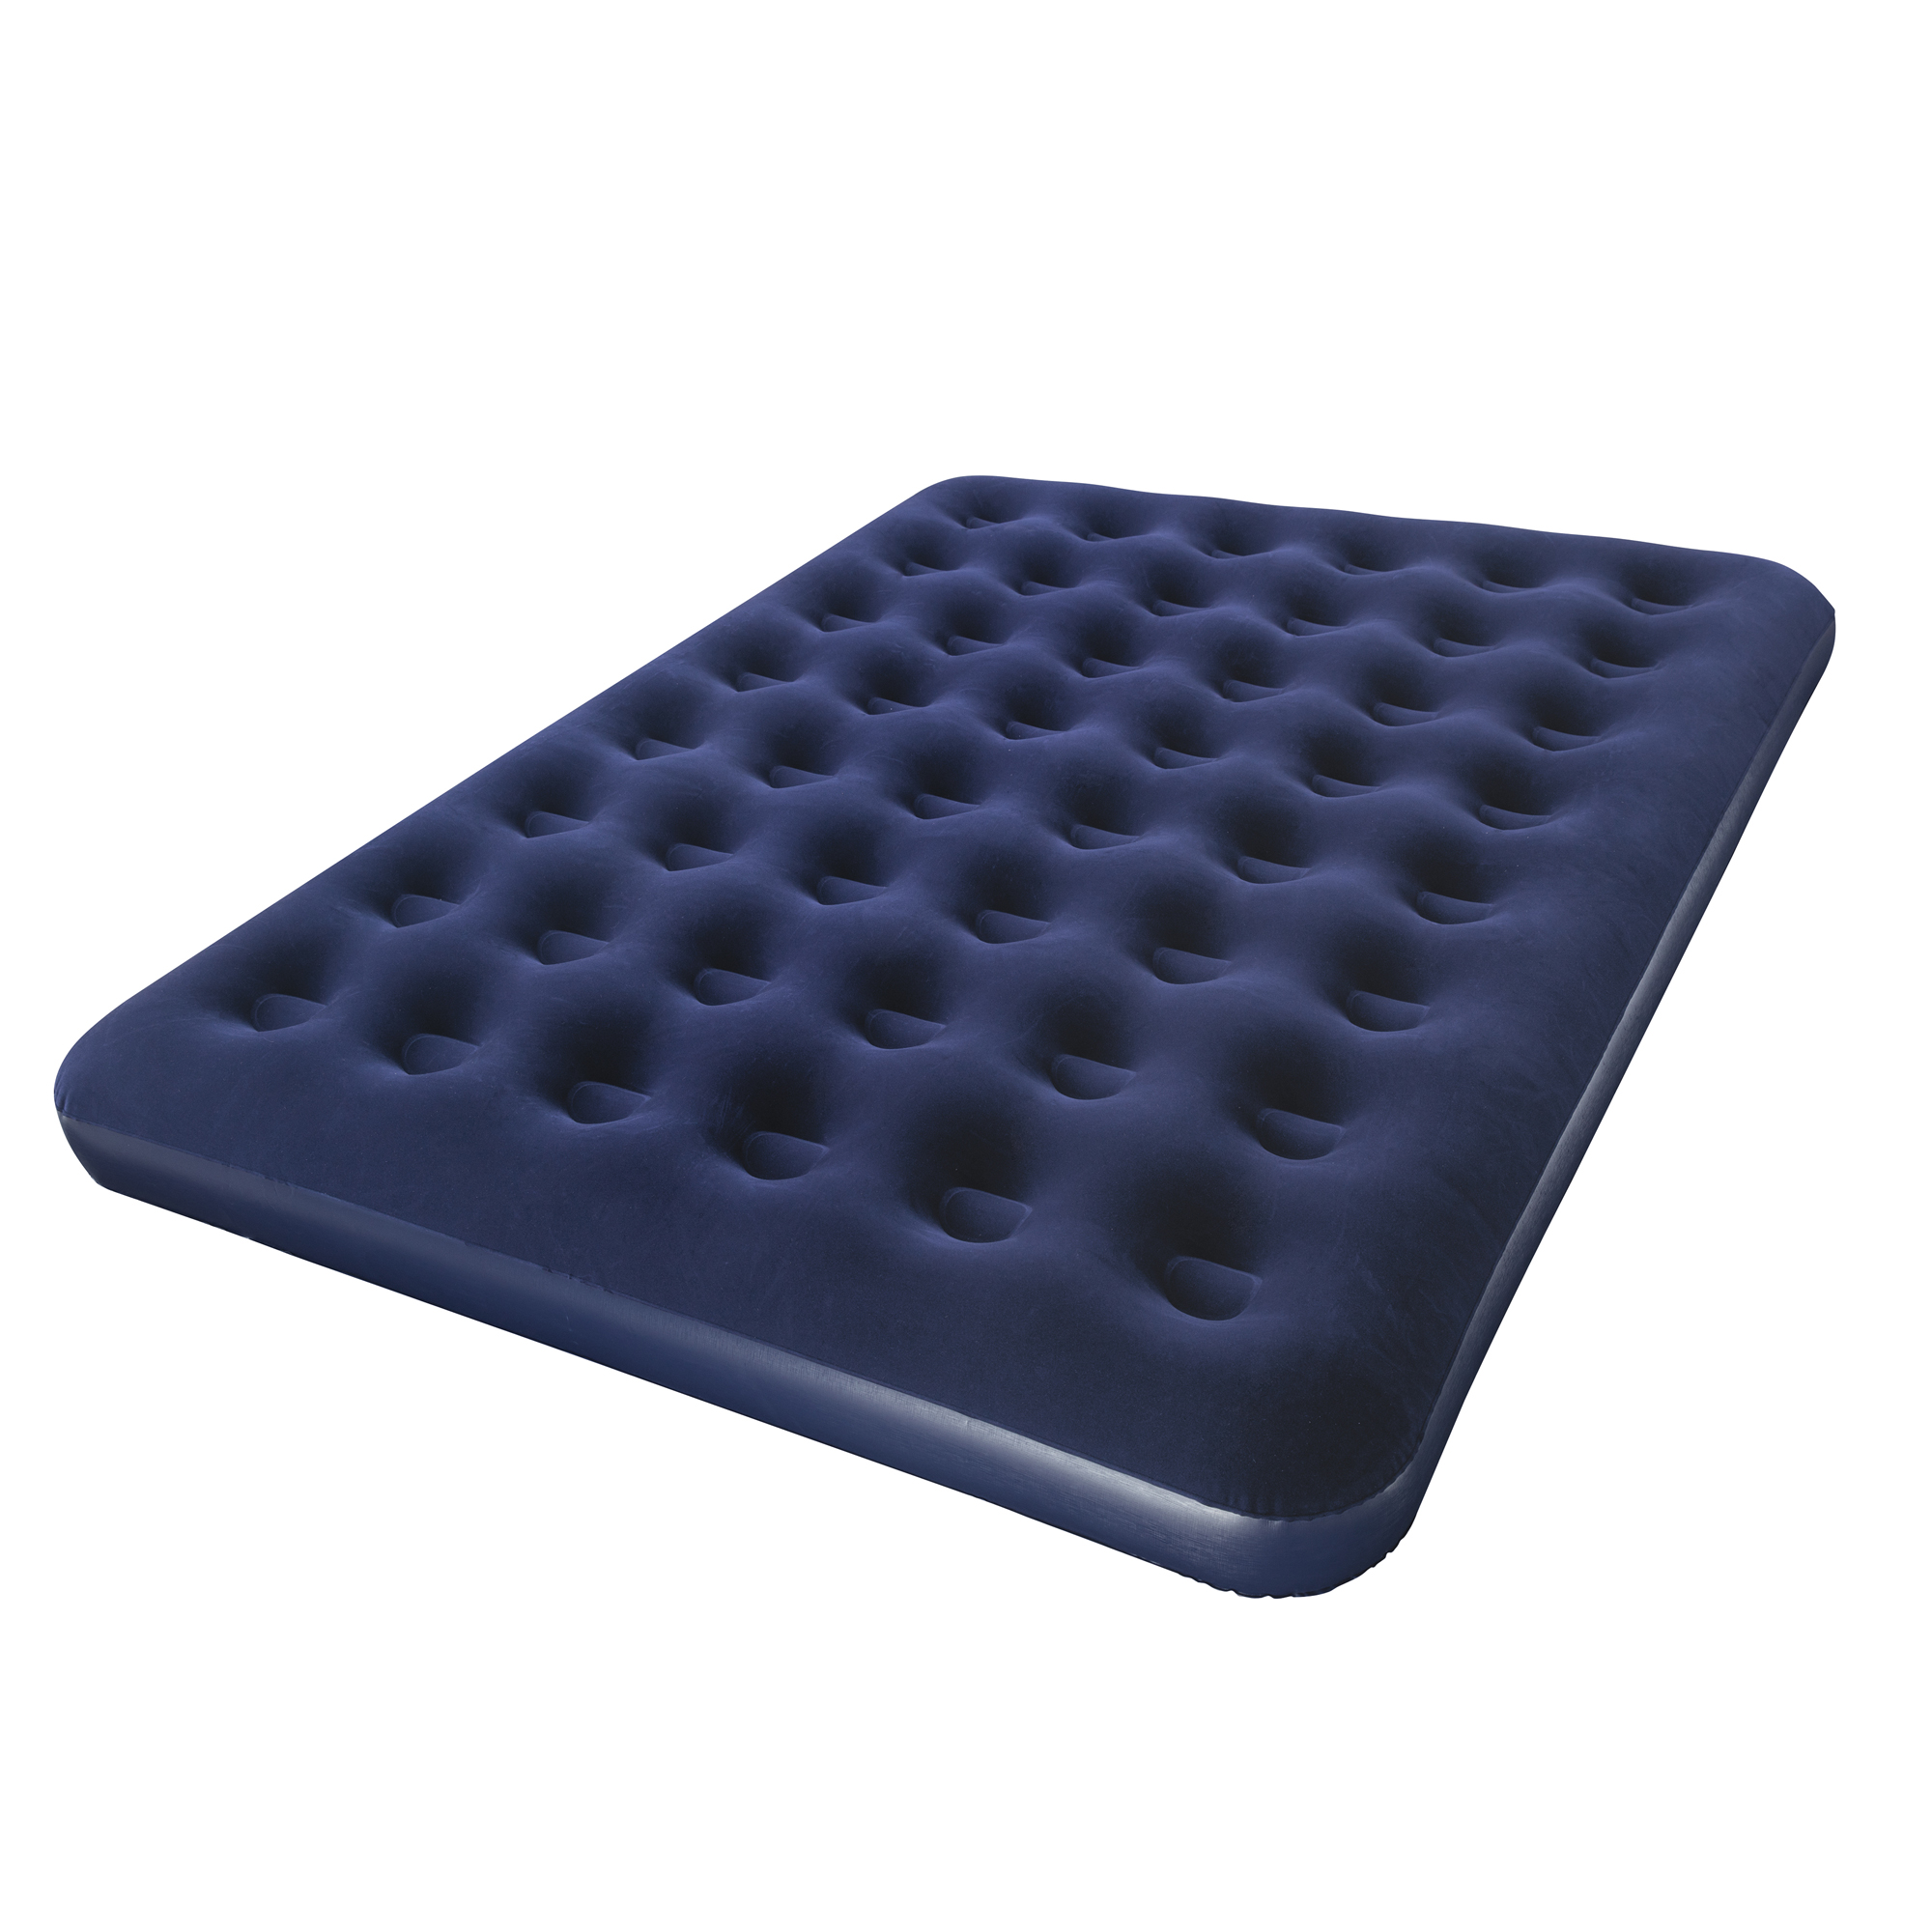 UPC 821808670031 product image for Bestway Flocked Queen Air Bed | upcitemdb.com